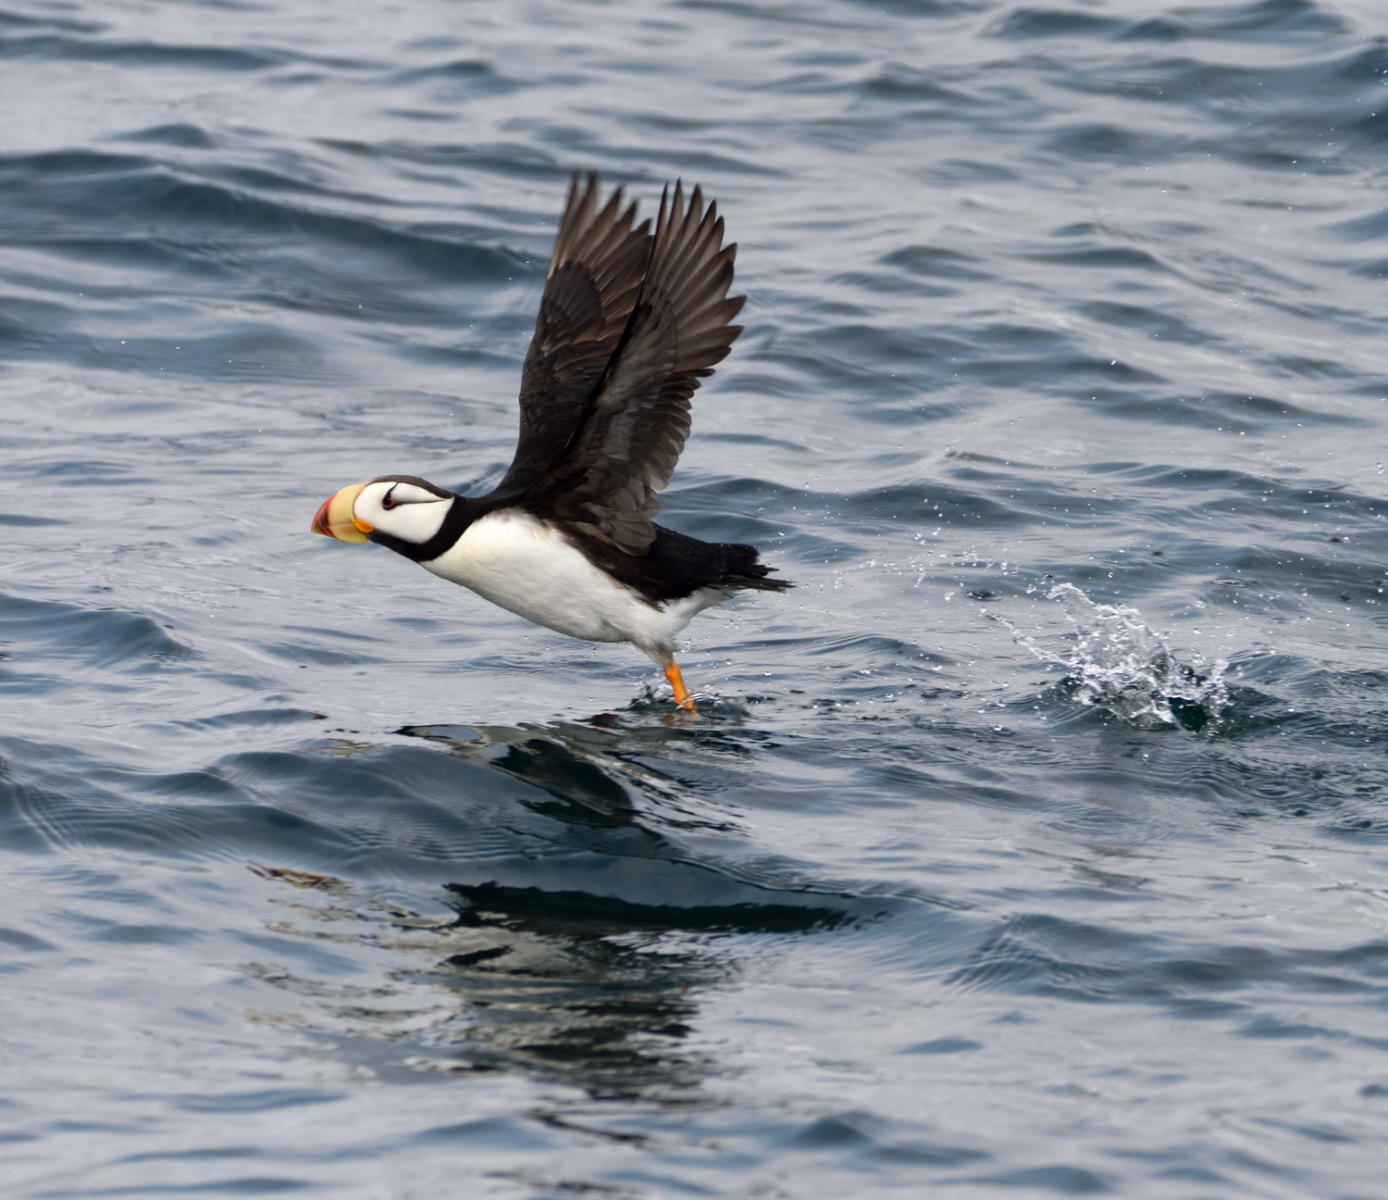 DSC_8262_1A1 - Tufted Puffin